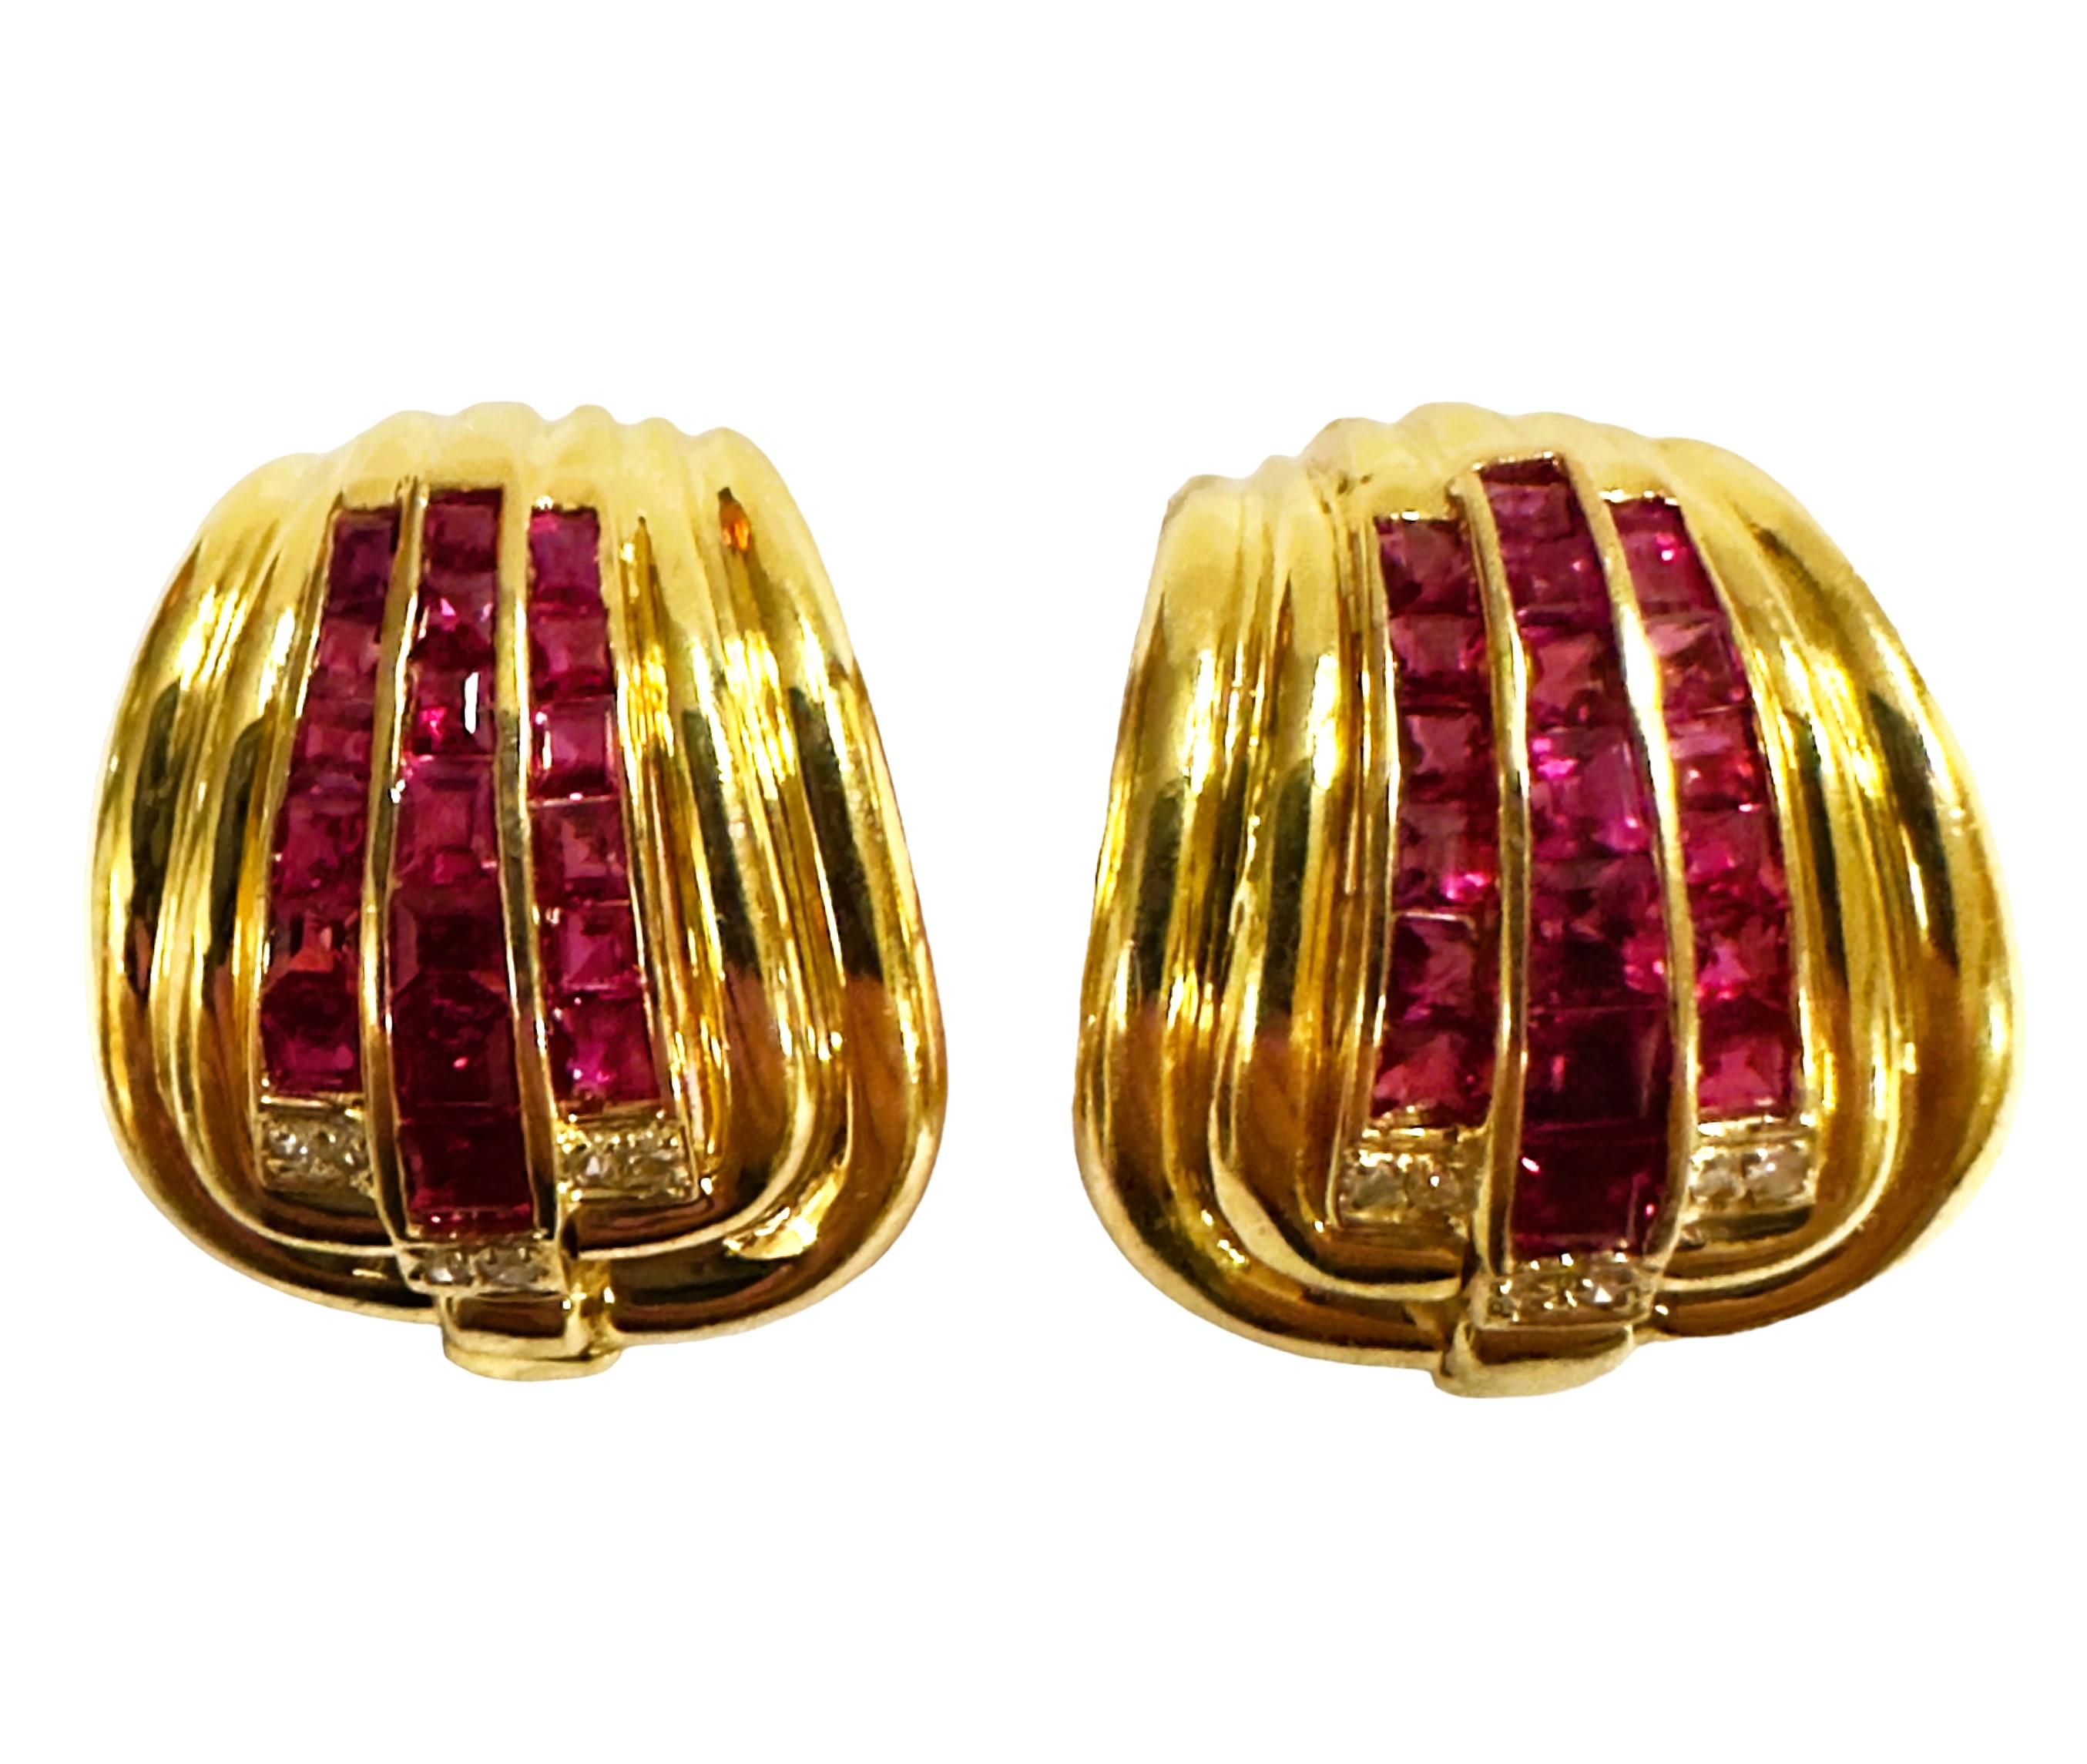 Women's 14k Yellow Gold Ruby and Diamond Earrings with Omega Backs & Appraisal